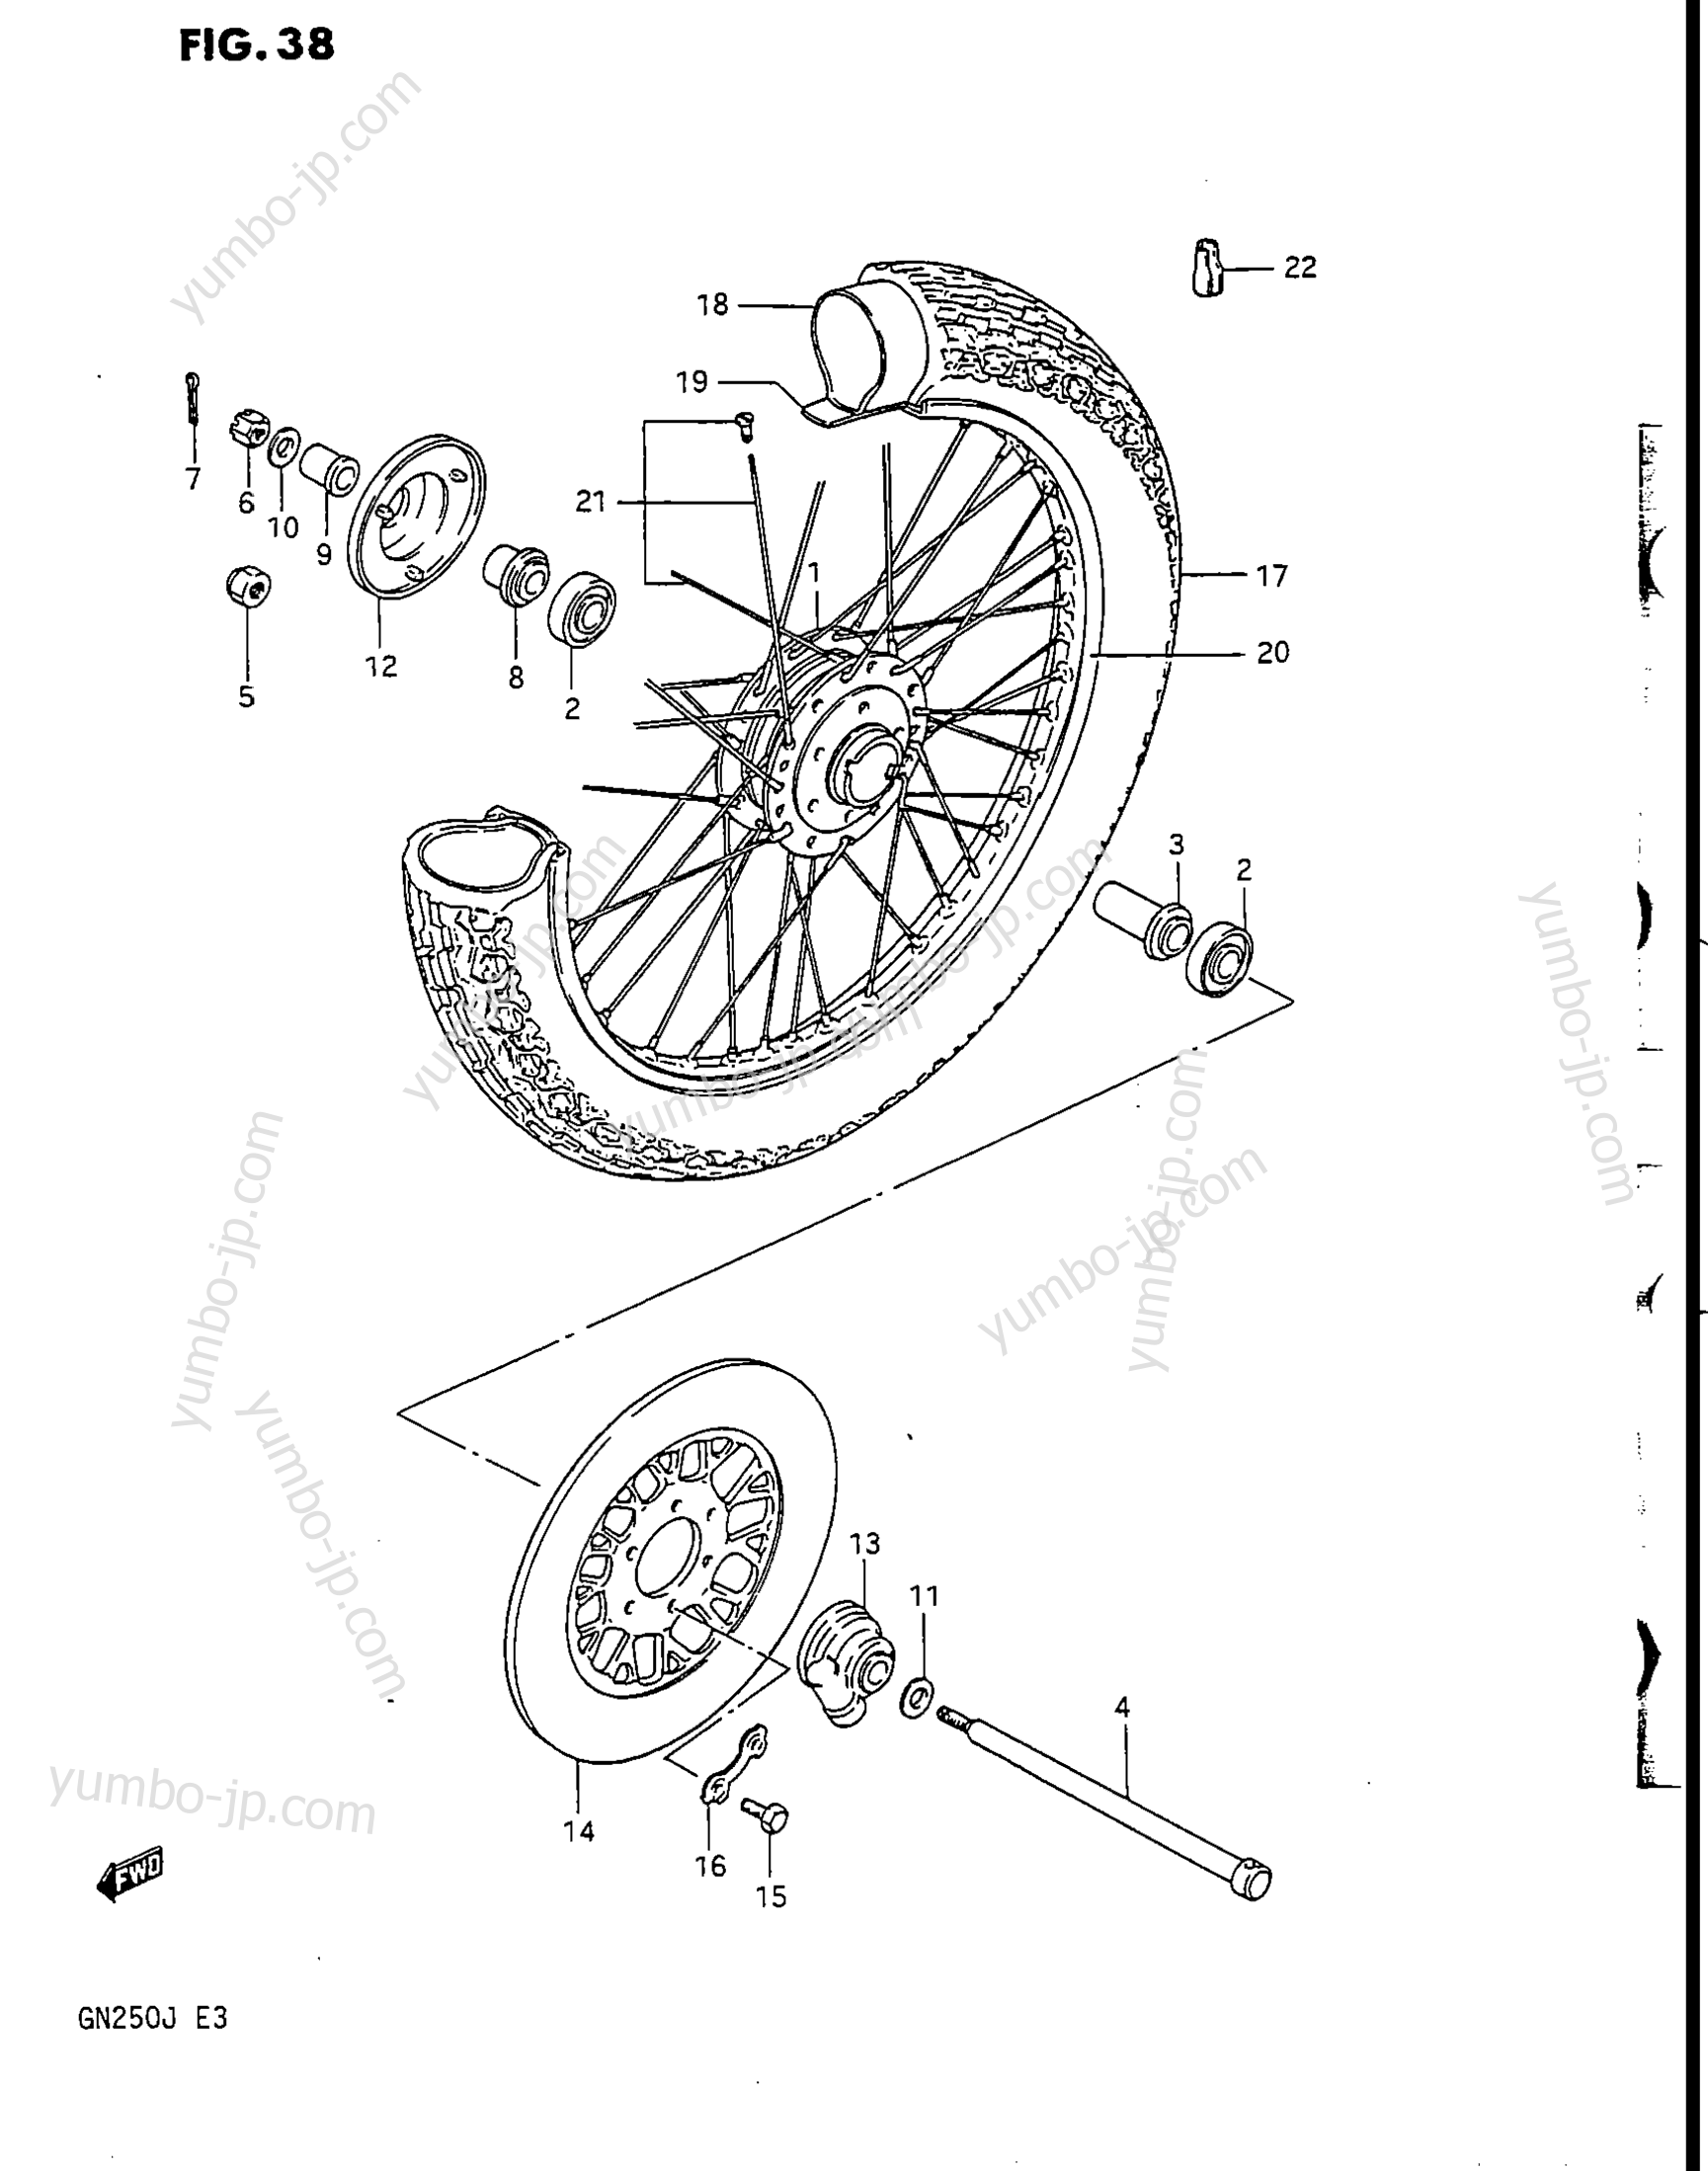 FRONT WHEEL (MODEL J) for motorcycles SUZUKI 1985, (GN250) 1988 year